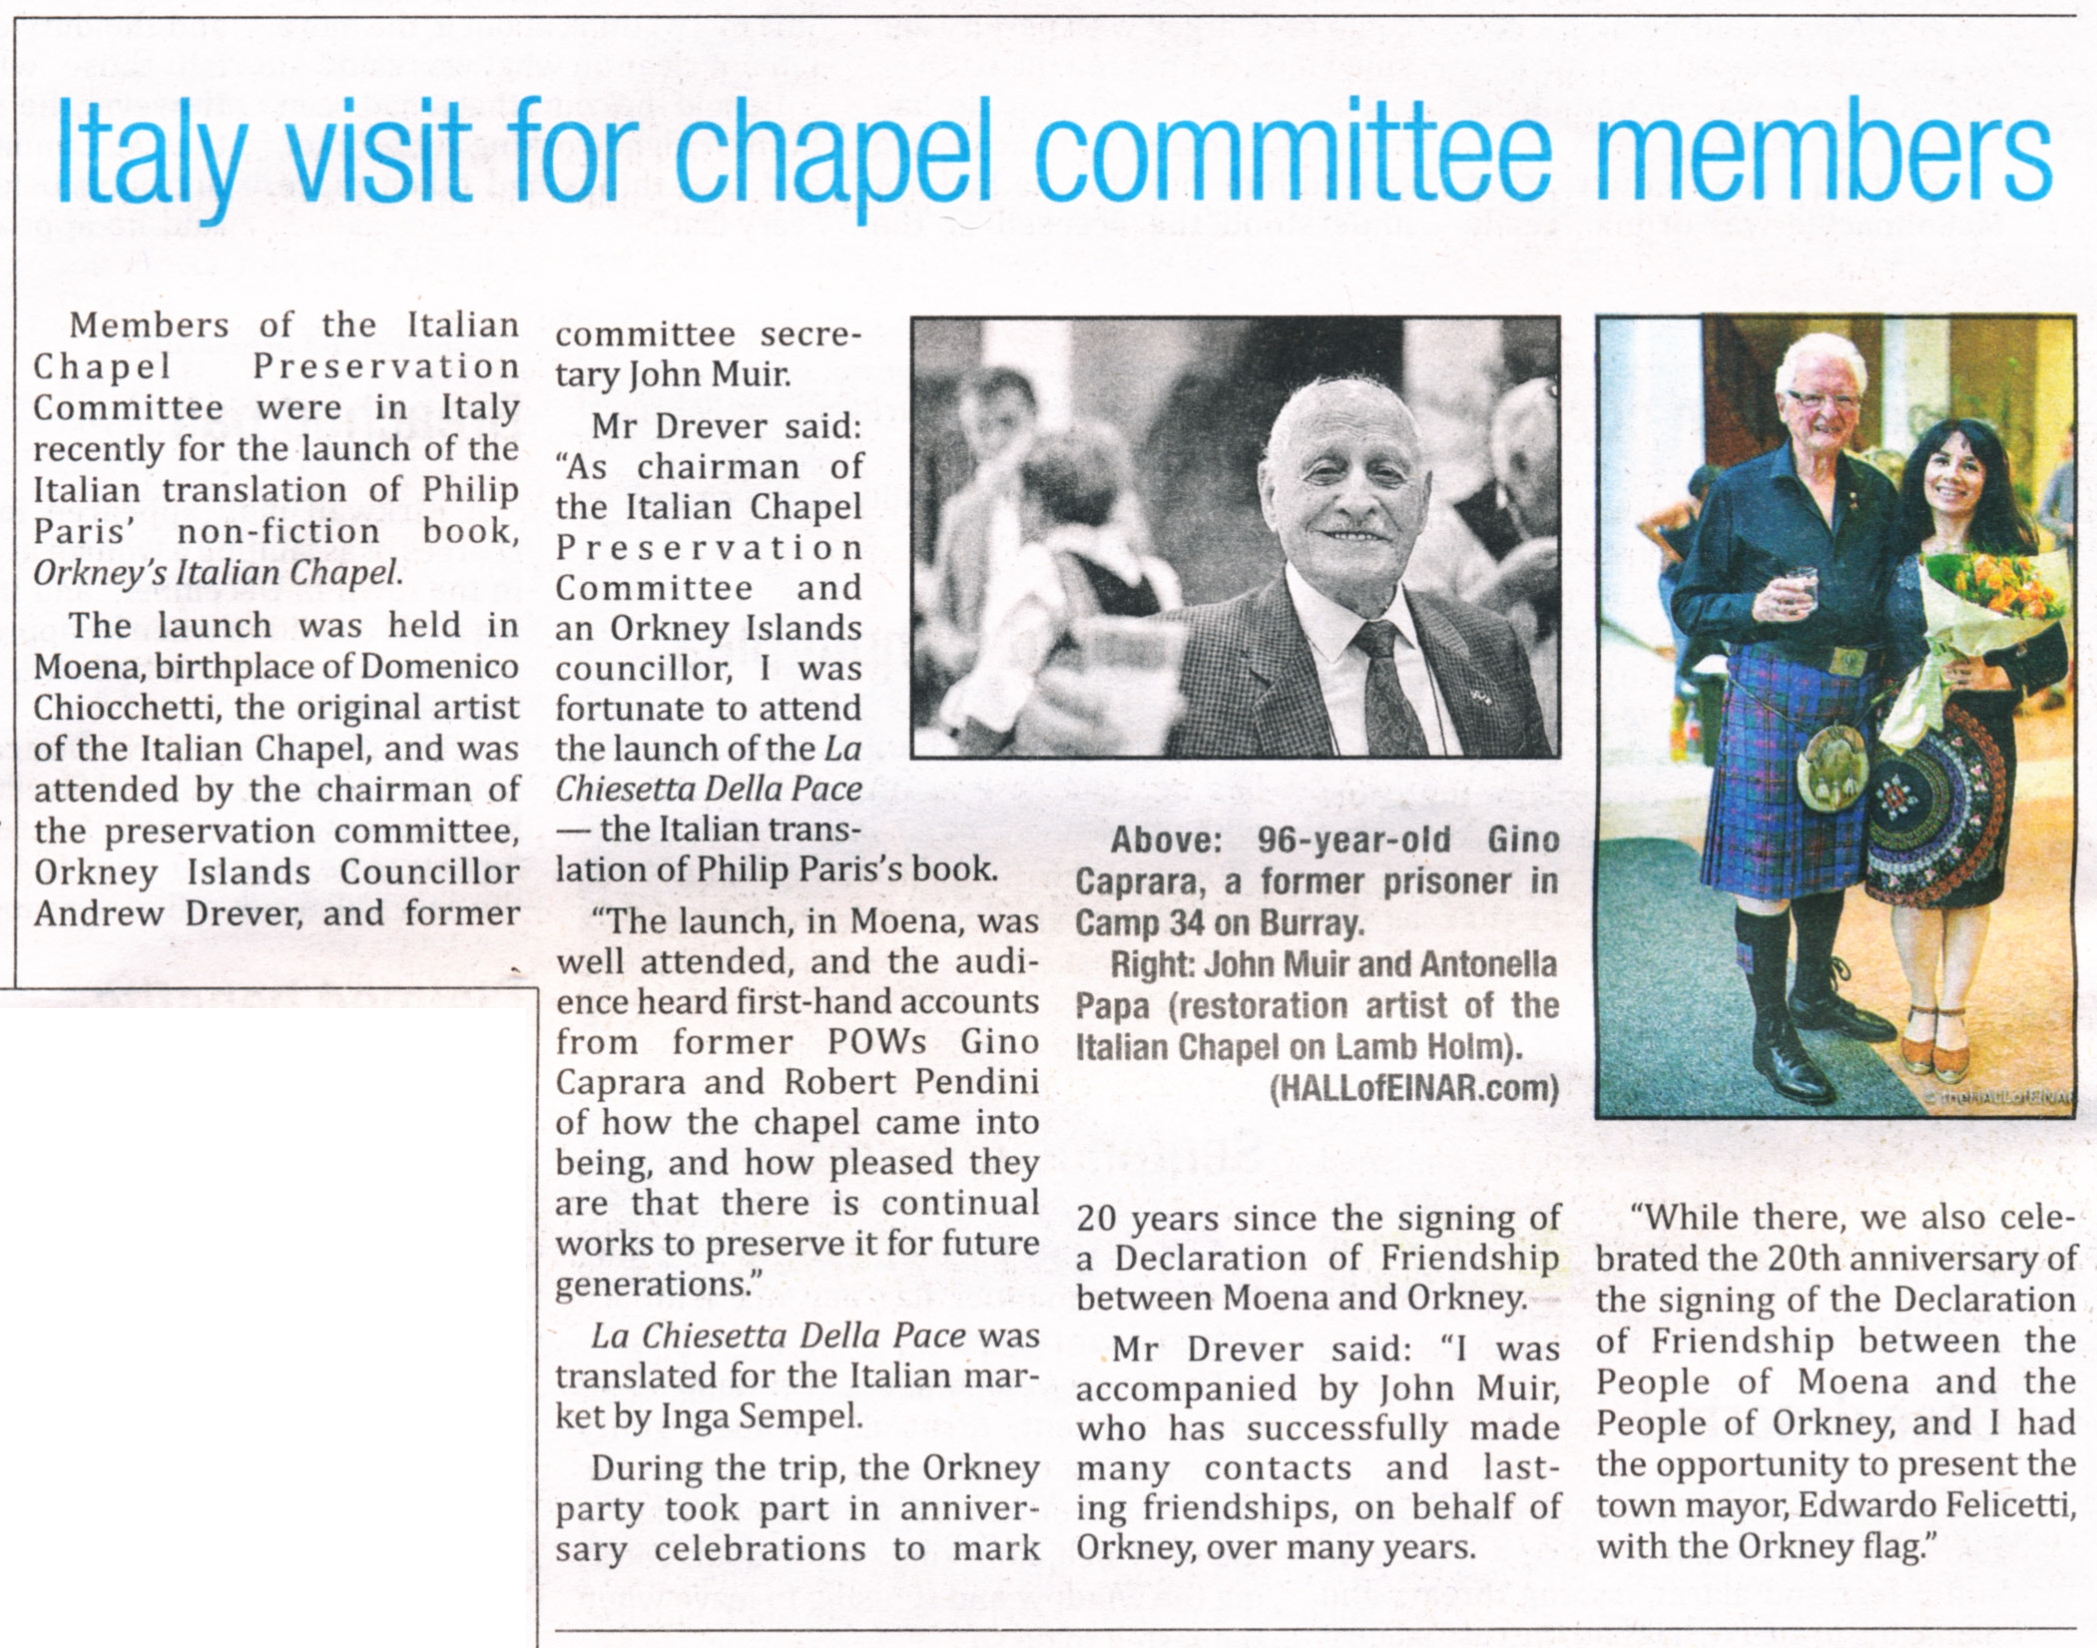 The Orcadian - "Italy visit for chapel committee members" 